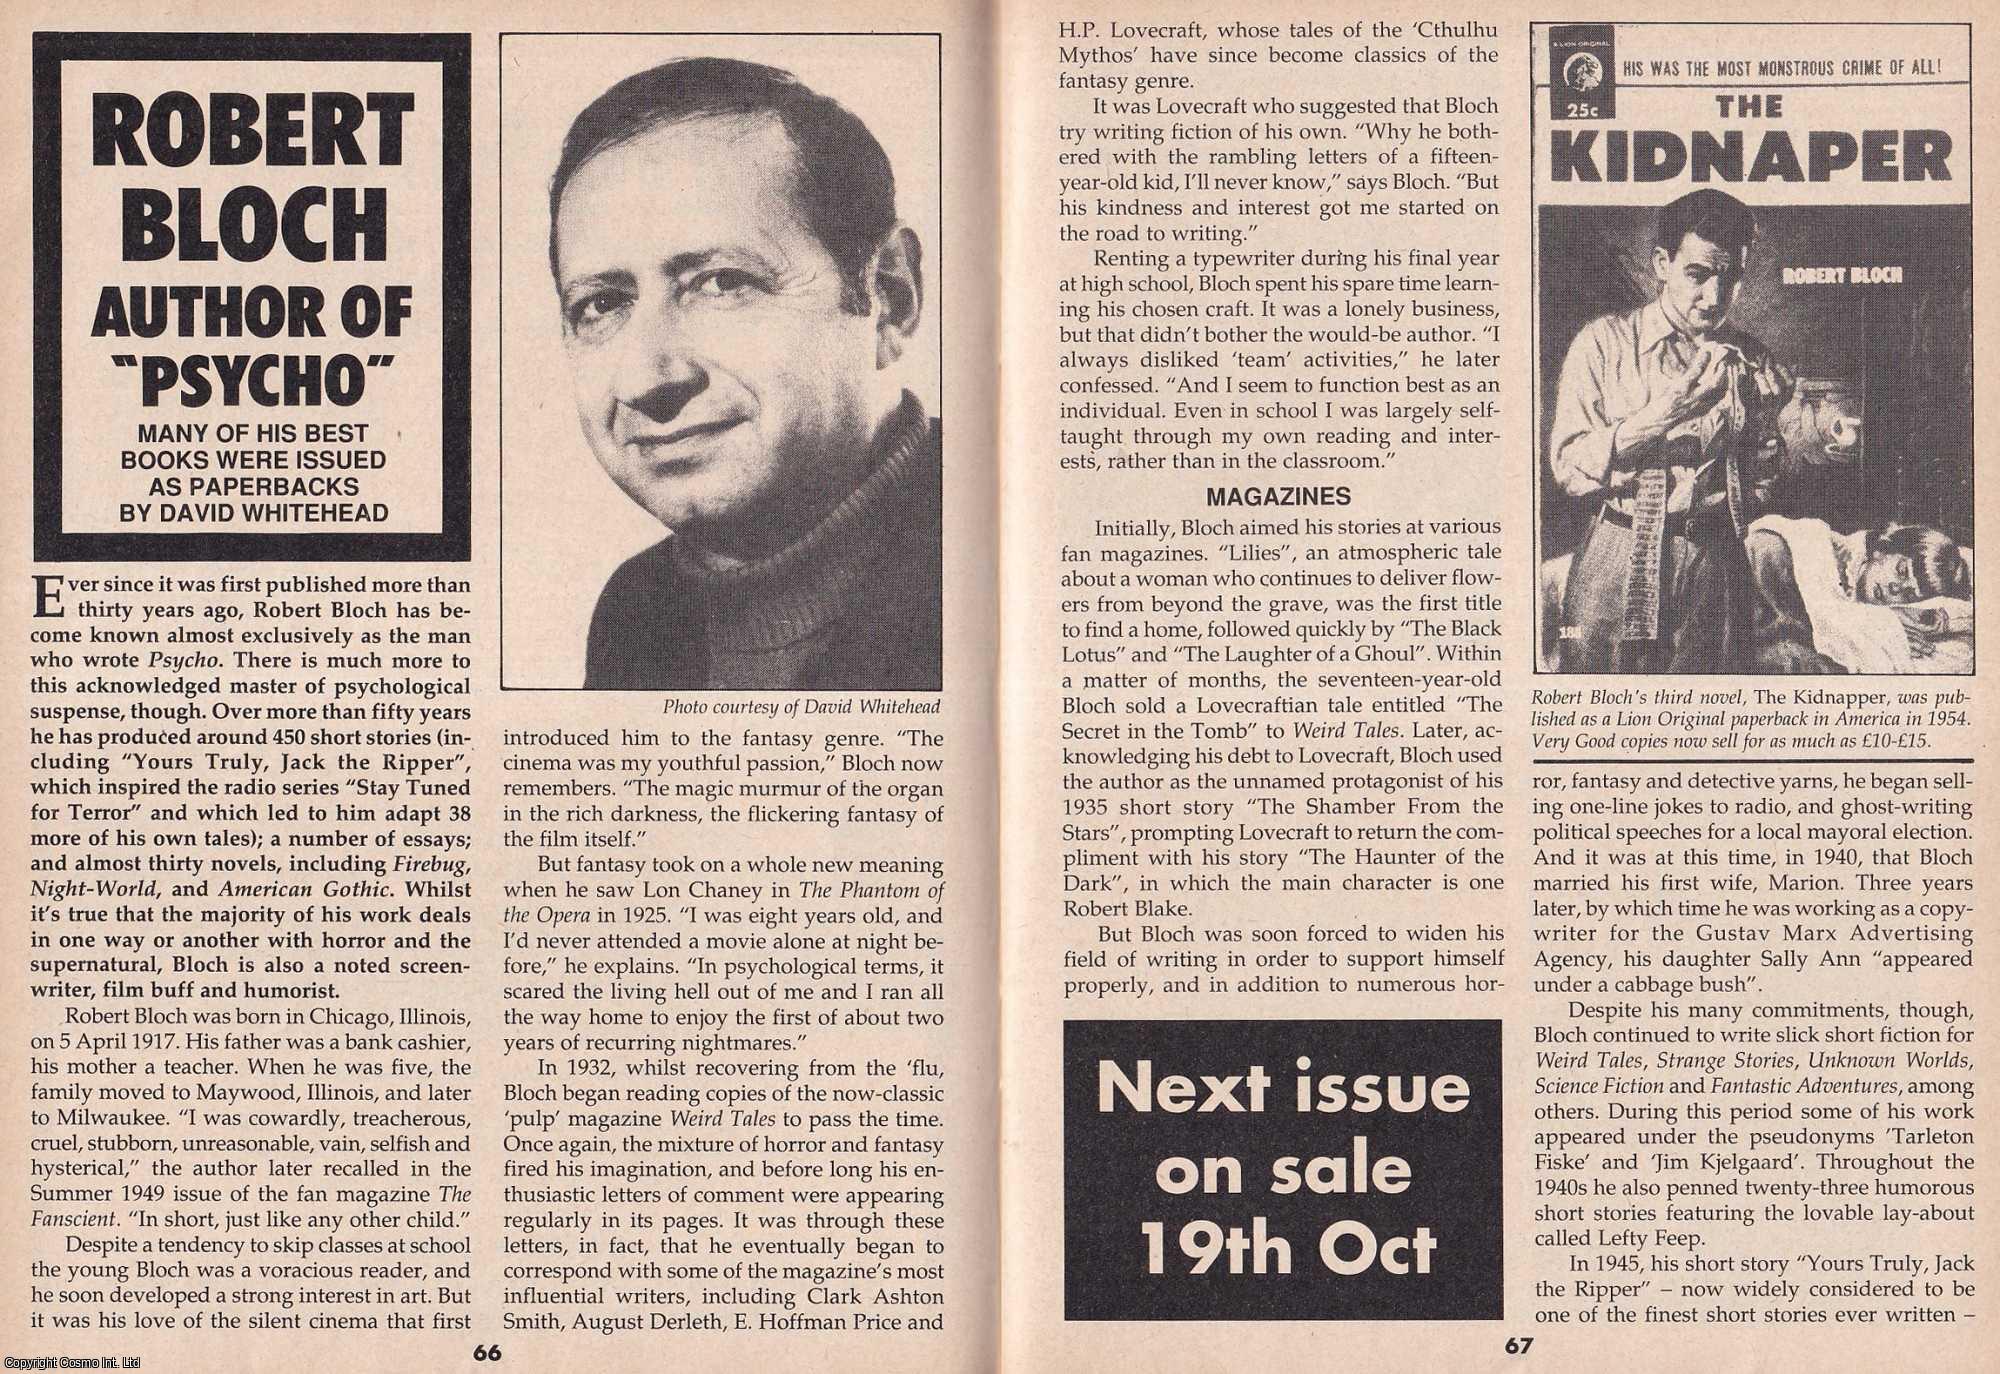 David Whitehead - Robert Bloch. Author of Psycho. This is an original article separated from an issue of The Book & Magazine Collector publication.